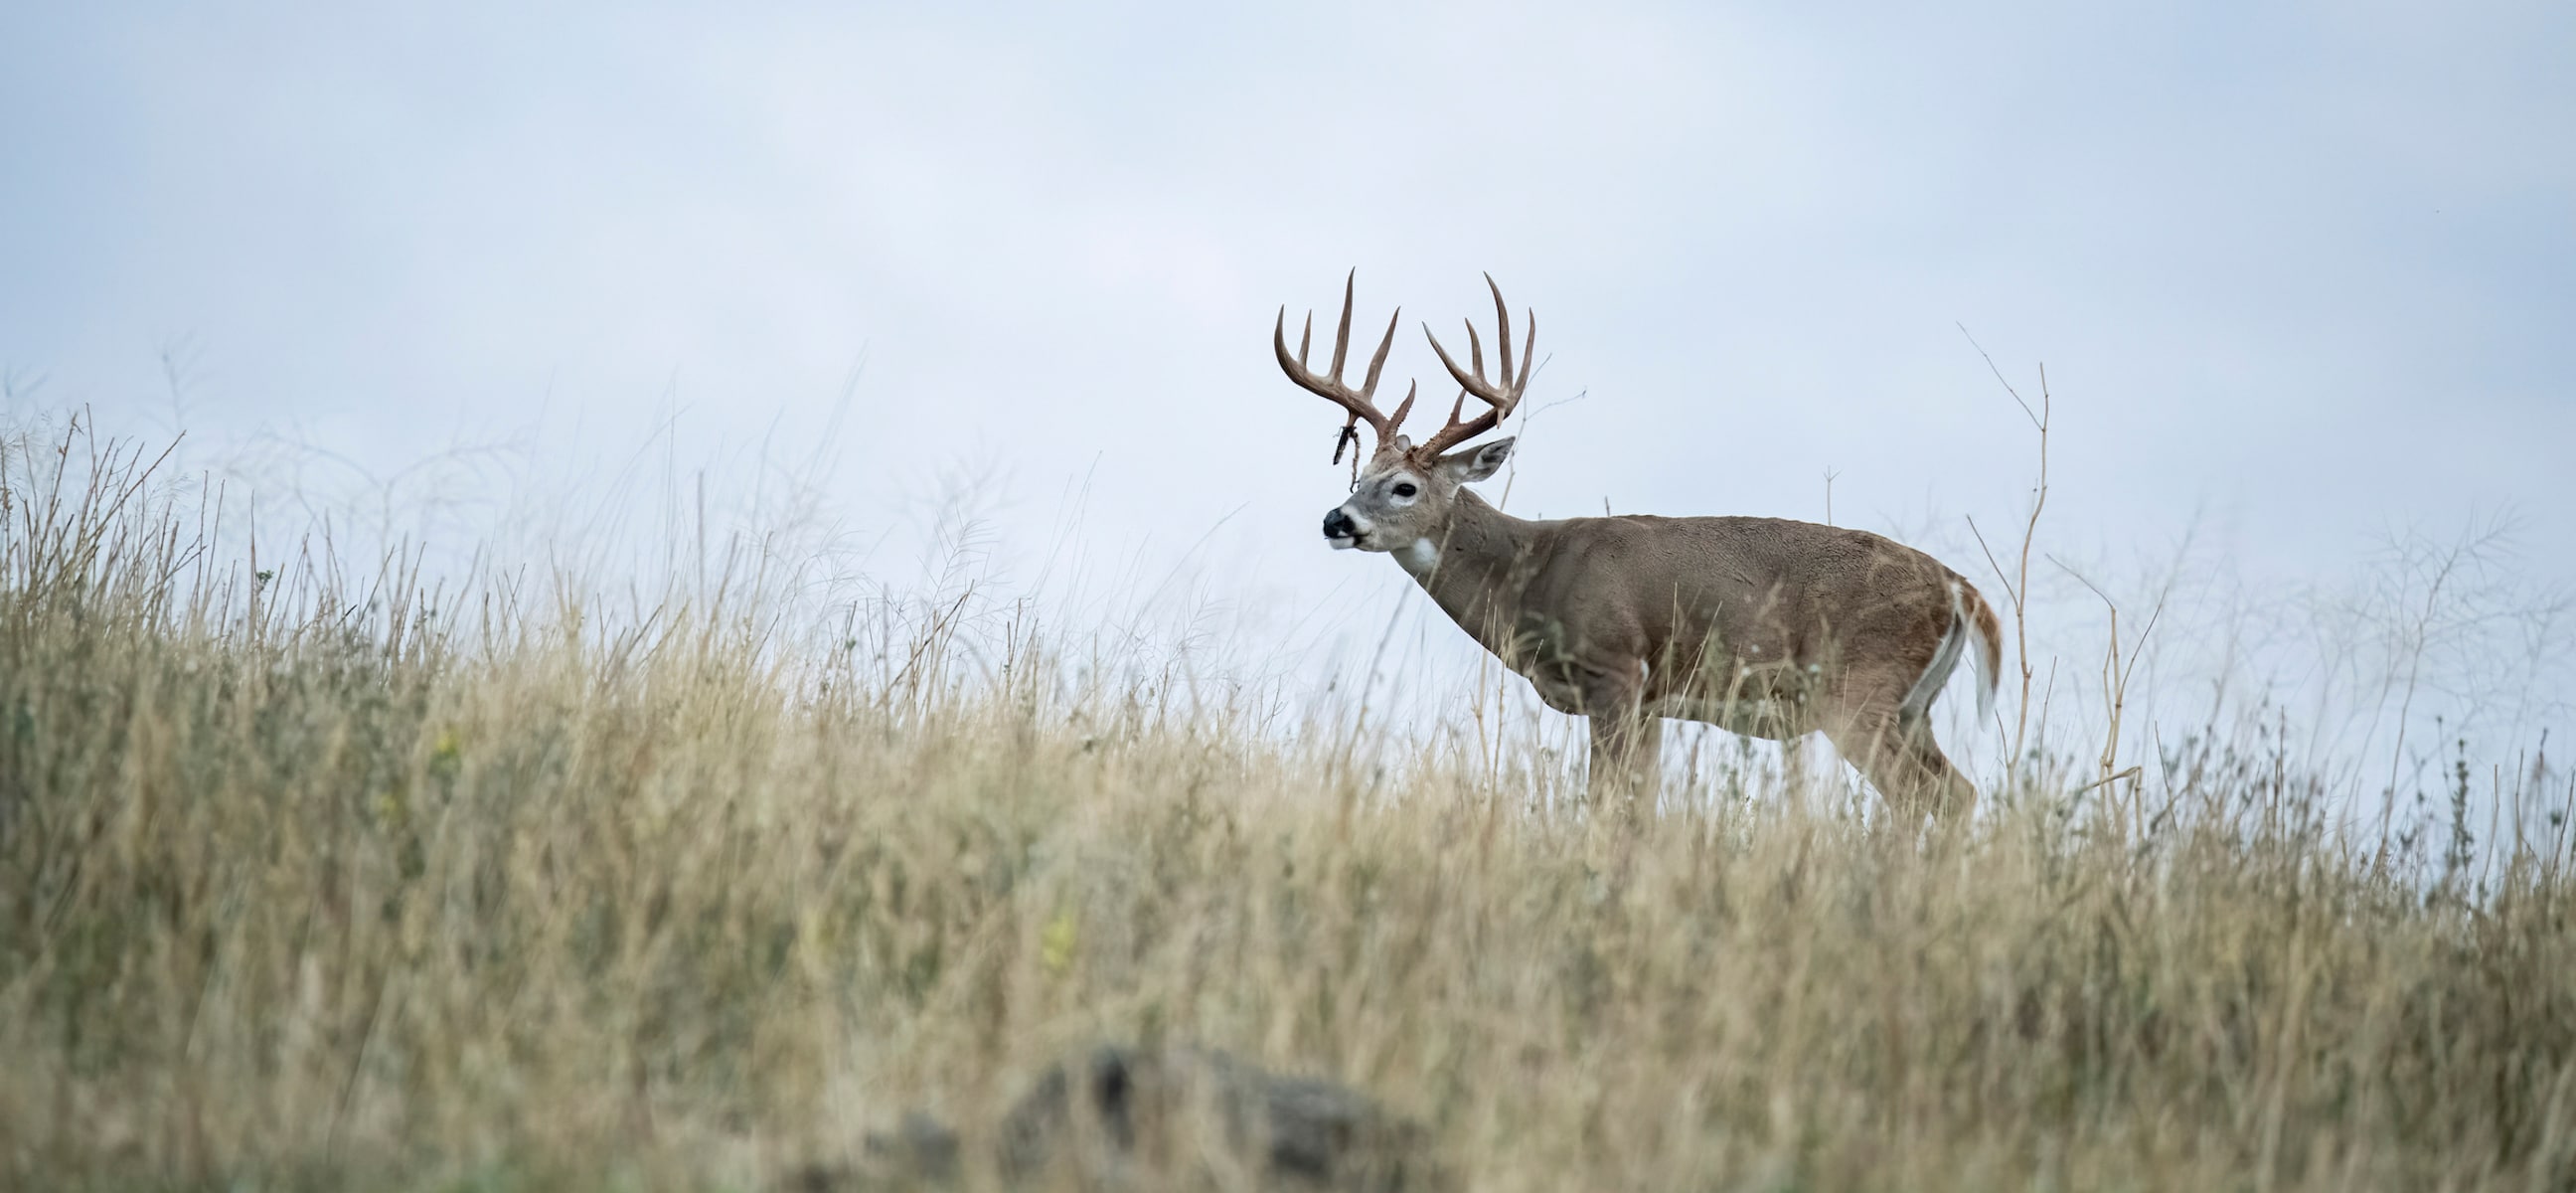 How to Properly Field Judge a Buck - Petersen's Bowhunting